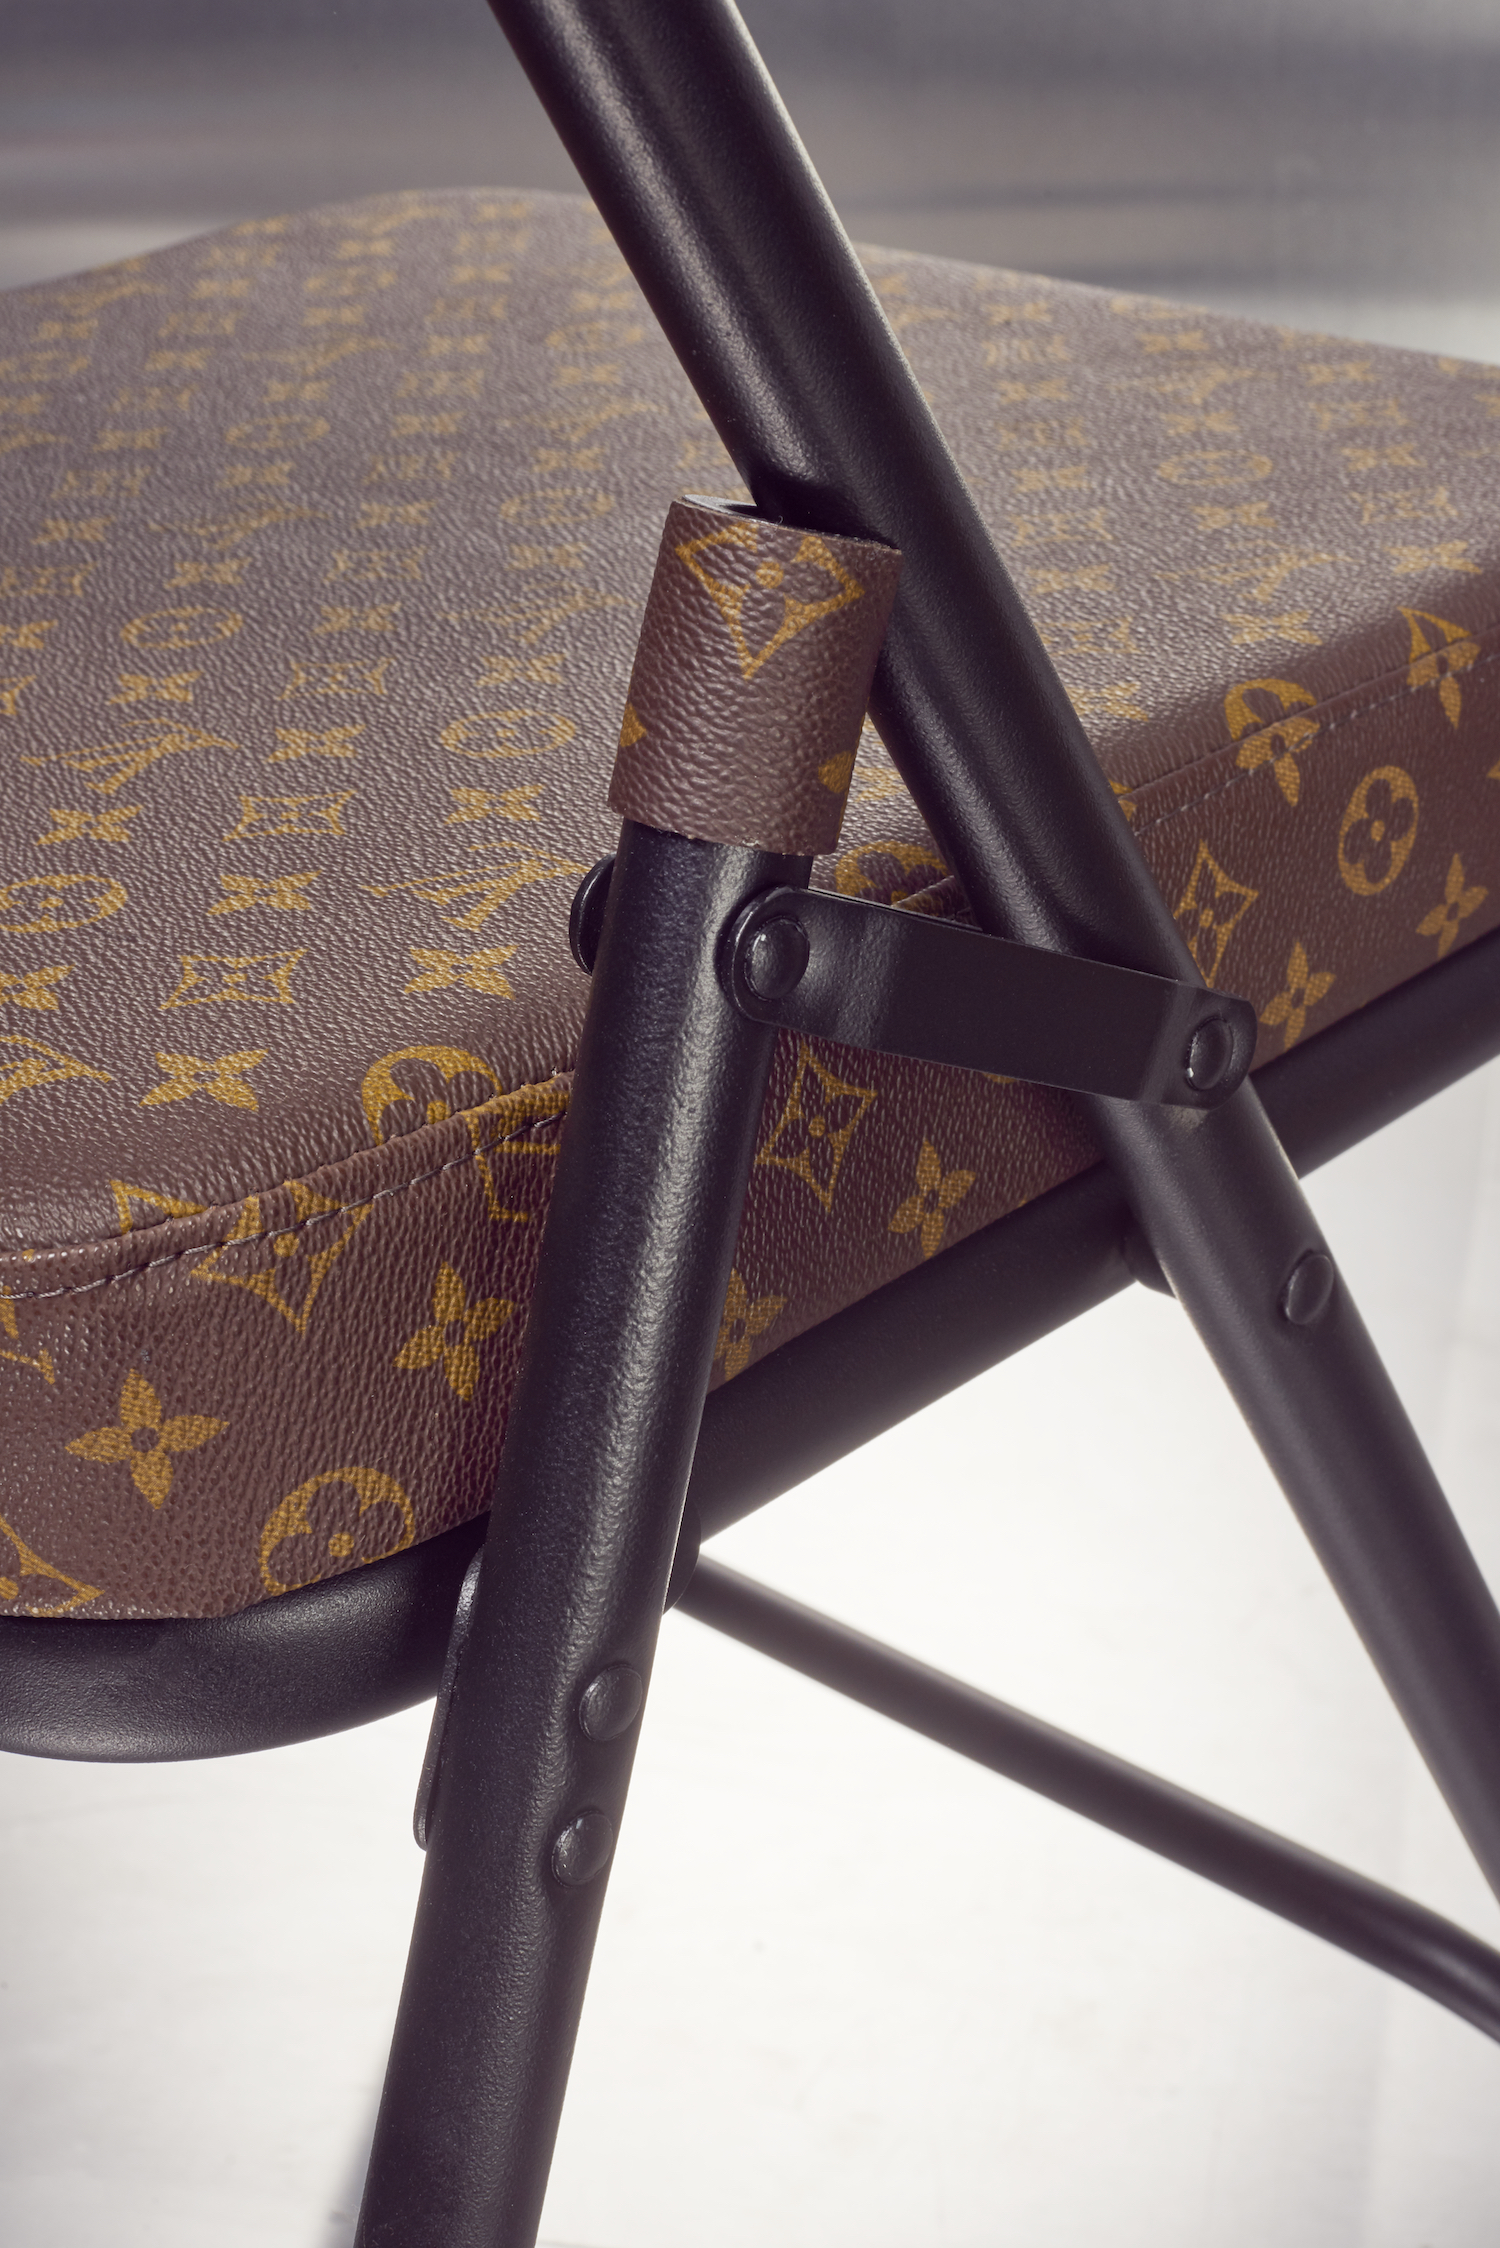 Sarah Coleman Turns Louis Vuitton Bags Into Chairs: Watch It Here